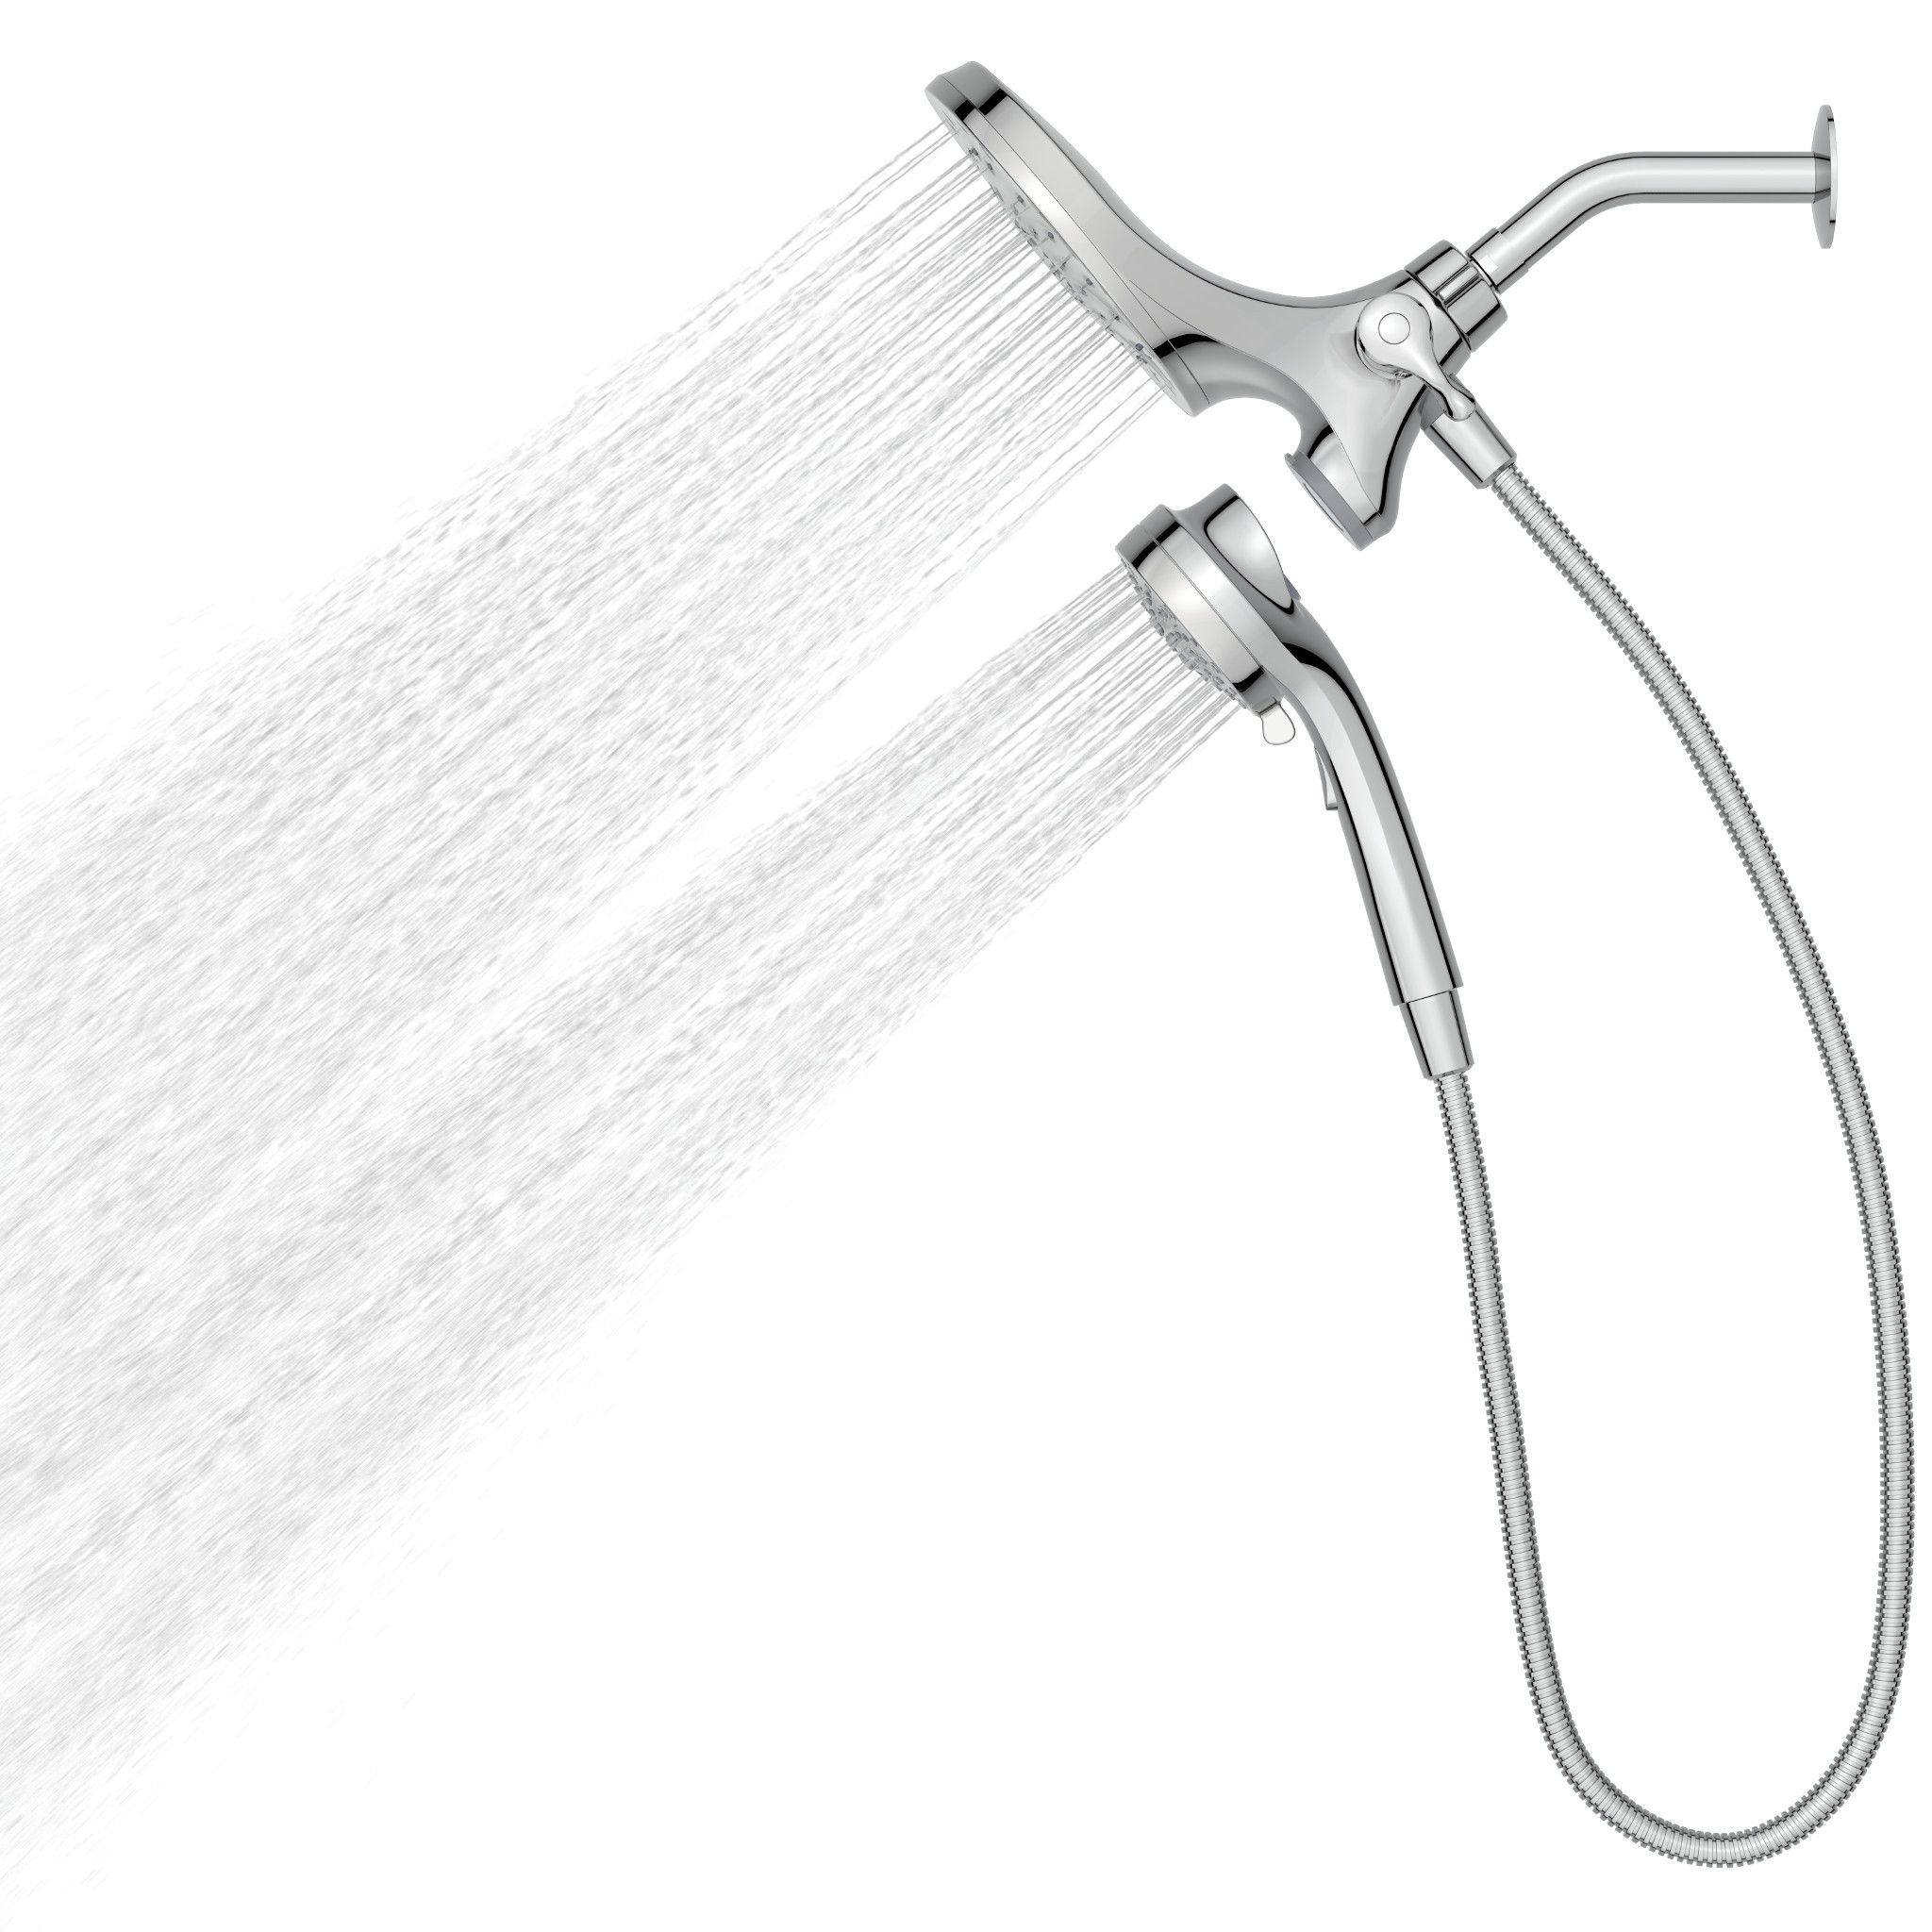 Moen Engage Magnetic 6.5" 6-Function Bathroom Handheld Showerhead with Magnetic Docking, Chrome - image 3 of 29